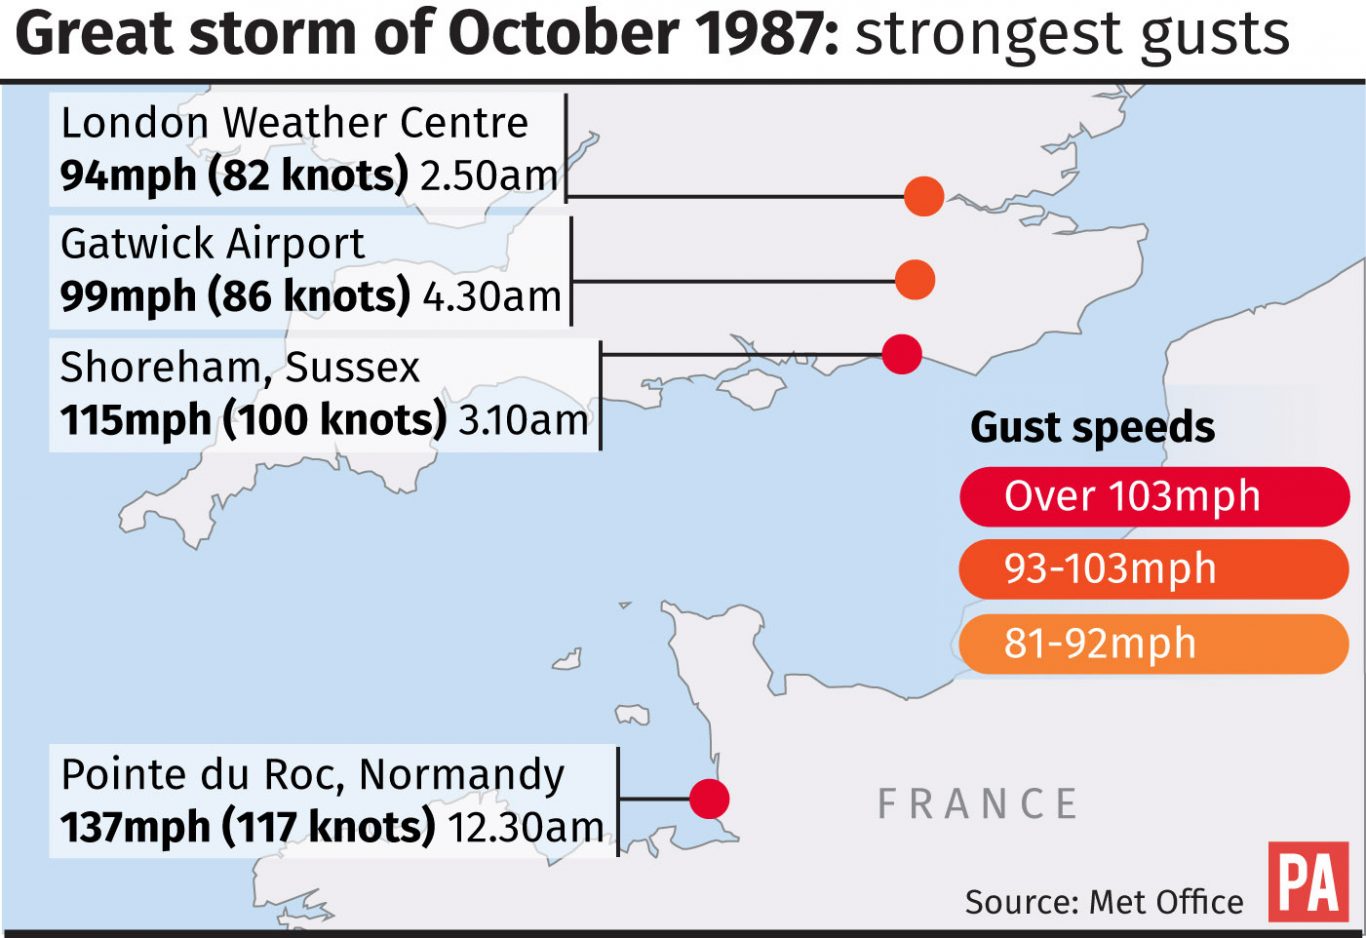 Map locates the strongest gusts during the Great Storm of 1987